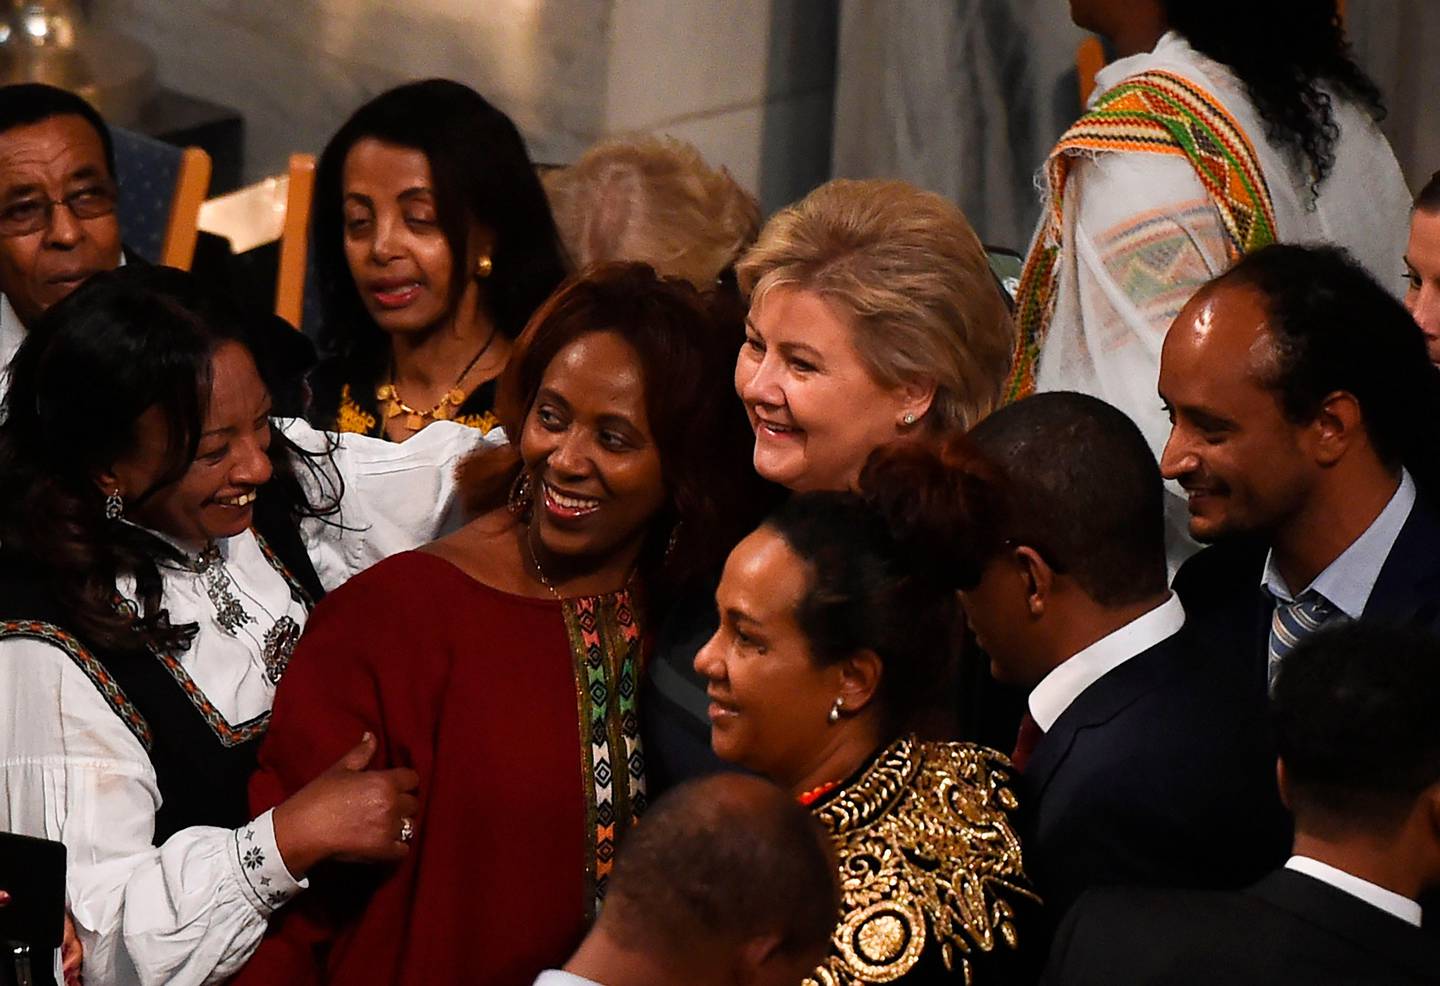 Norwegian prime minister Erna Solberg (C) pose for a picture with guests upon arrival for the Nobel Peace Prize ceremony at the city hall in Oslo on December 10, 2019. - The Ethiopian prime minister Abiy Ahmed is picking up his Nobel Peace Prize in the Norwegian capital as ethnic violence is on the rise at home, festivities are being kept to the bare minimum and he has refused to speak to the media cancelling this years Nobel Peace Prize press conference. (Photo by Fredrik VARFJELL / AFP)